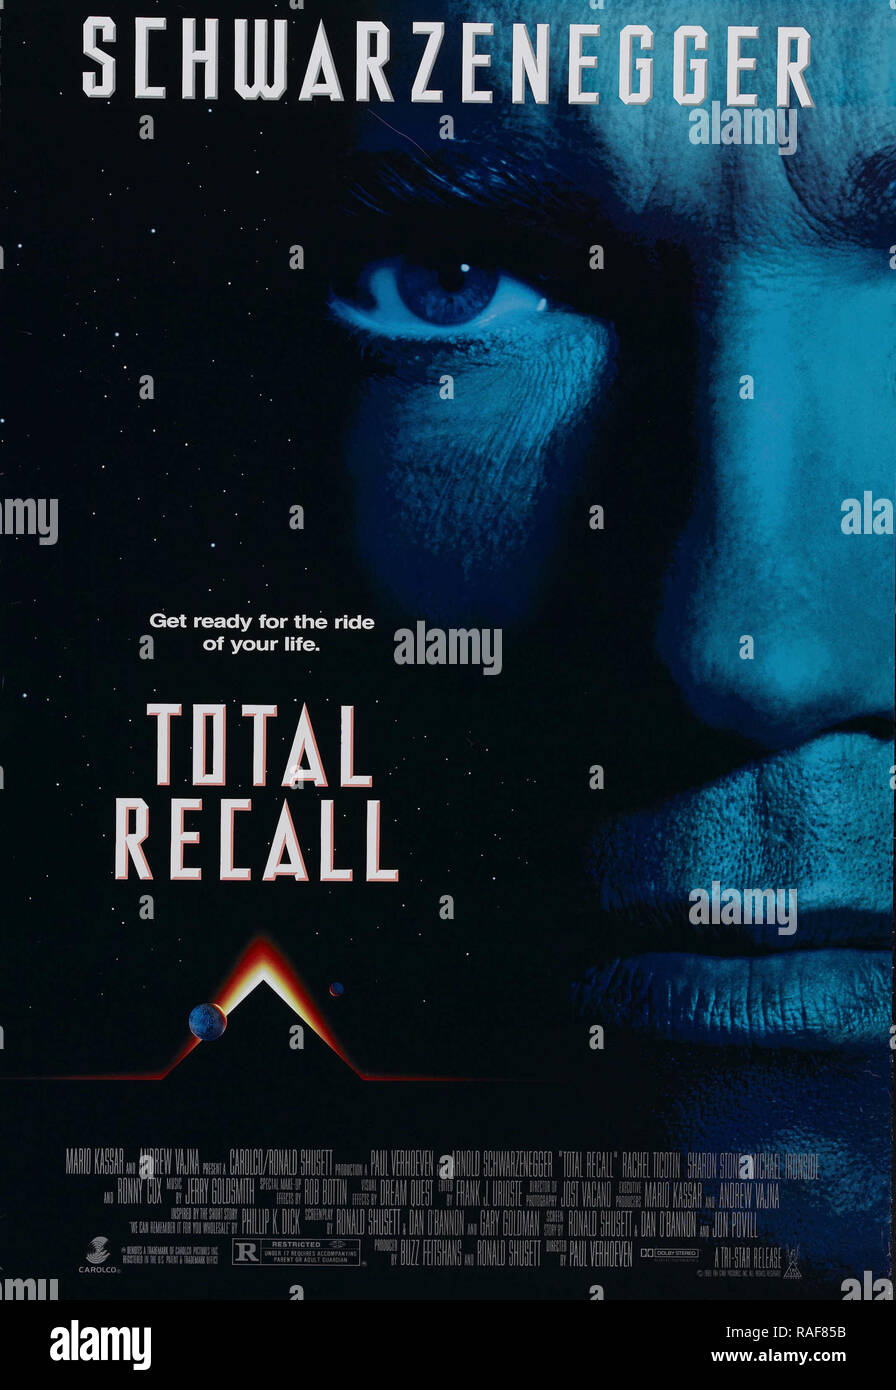 Total Recall (Tri Star Pictures, 1990), Poster  Arnold Schwarzenegger  File Reference # 33636 870THA Stock Photo